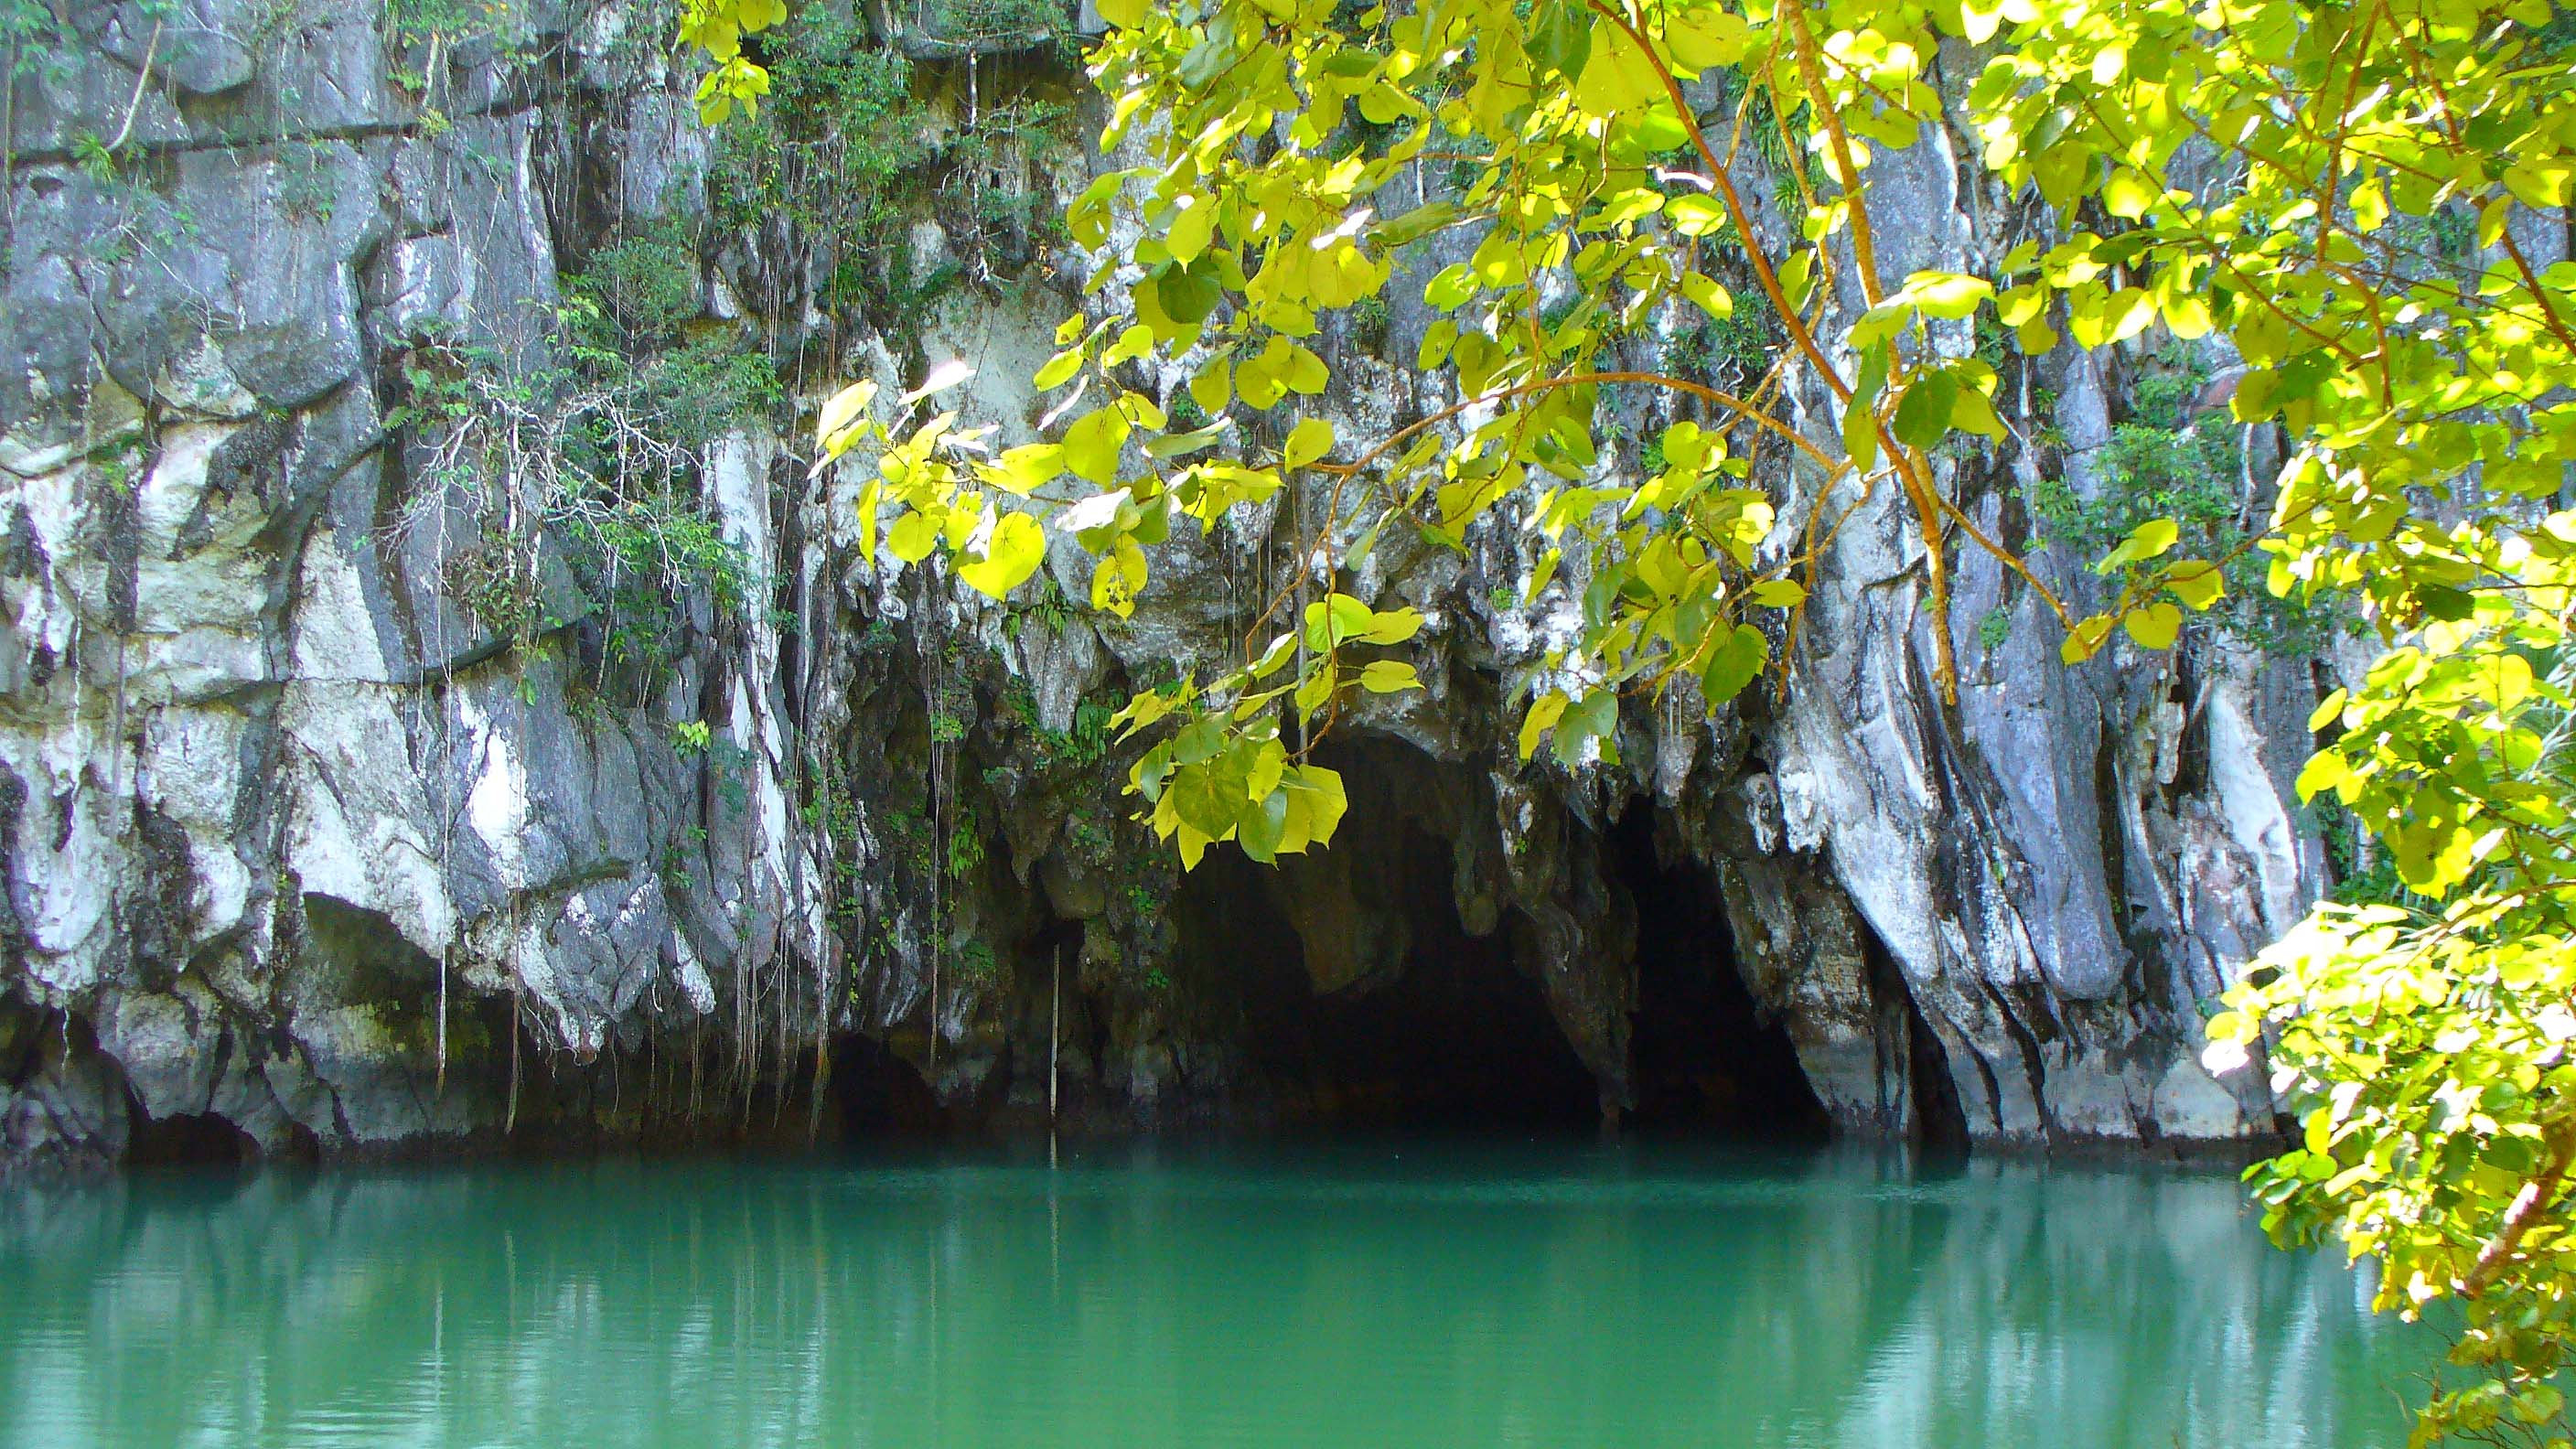 Cave entrace at Puerto Princesa Subterranean River National Park in Palawan, Philippines. Photo by Jud Partin